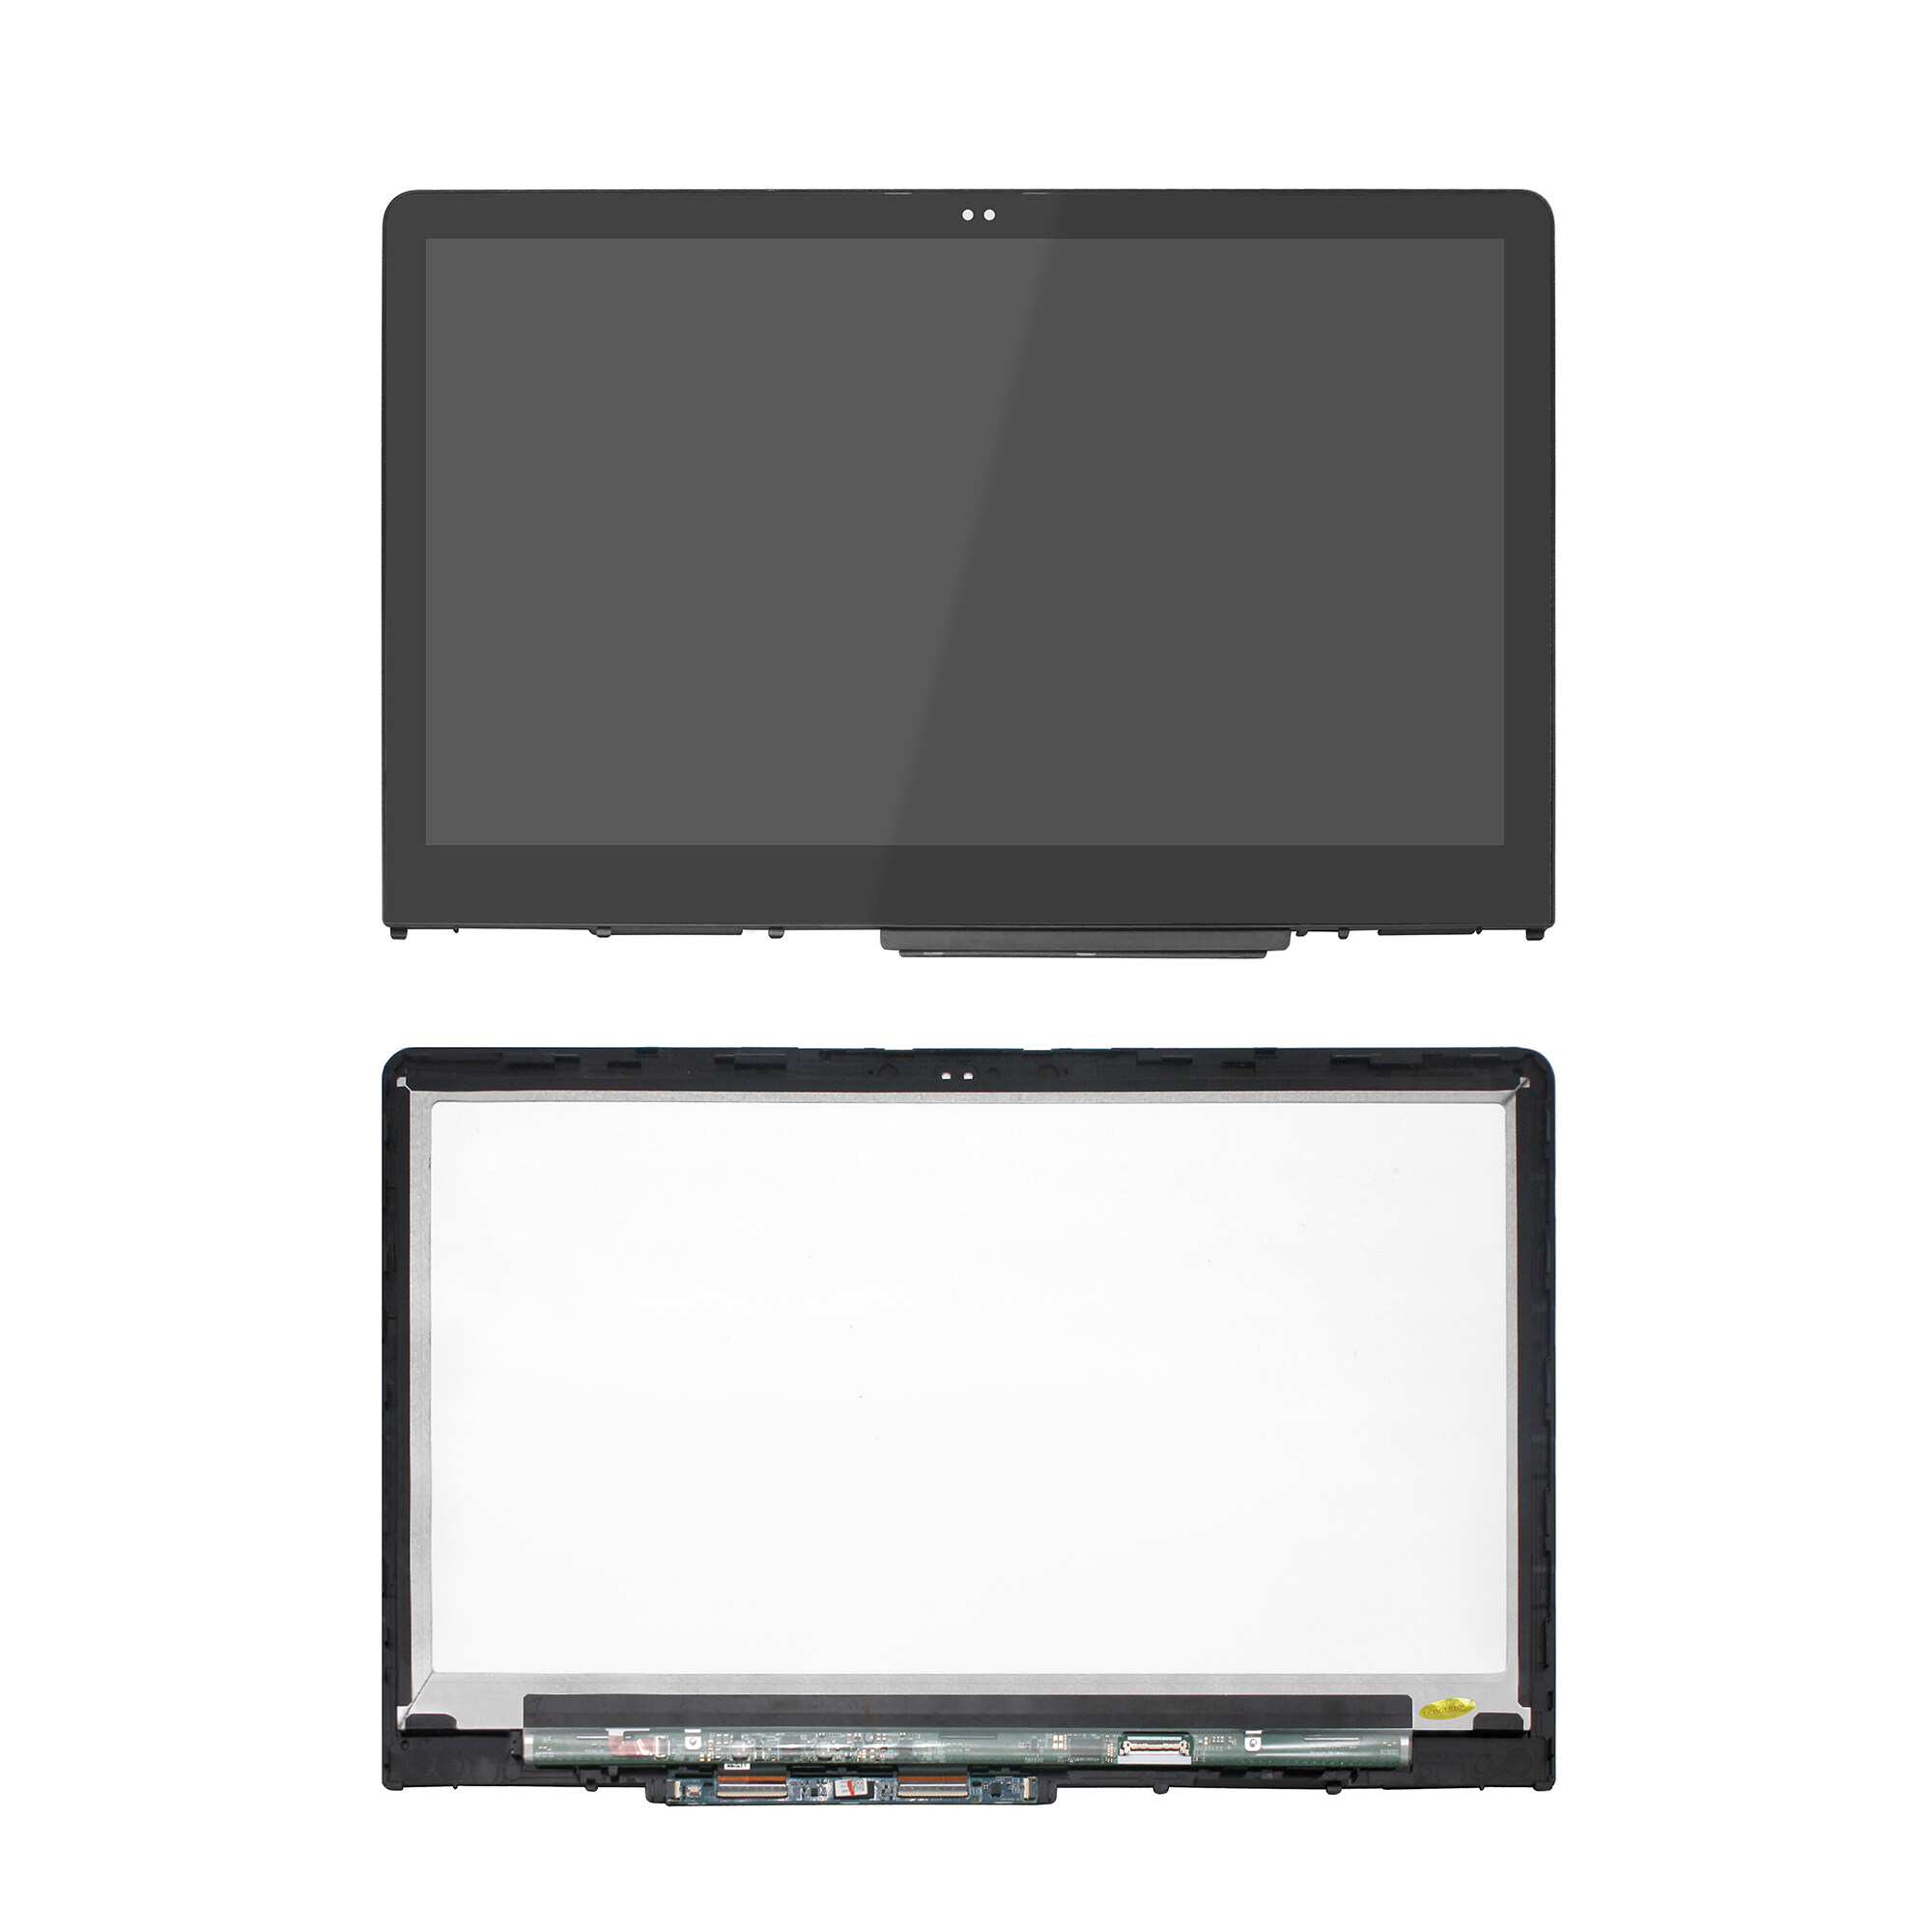 Kreplacement LED LCD Touch Screen Display Assembly+Bezelfor HP Pavilion x360 15-BR158CL 15-BR082WM 15-BR124TX 15-BR010TX 15-br016ng 15-br095ms 15-br013na 15-br002cy 15-br158cl 15-br080WM